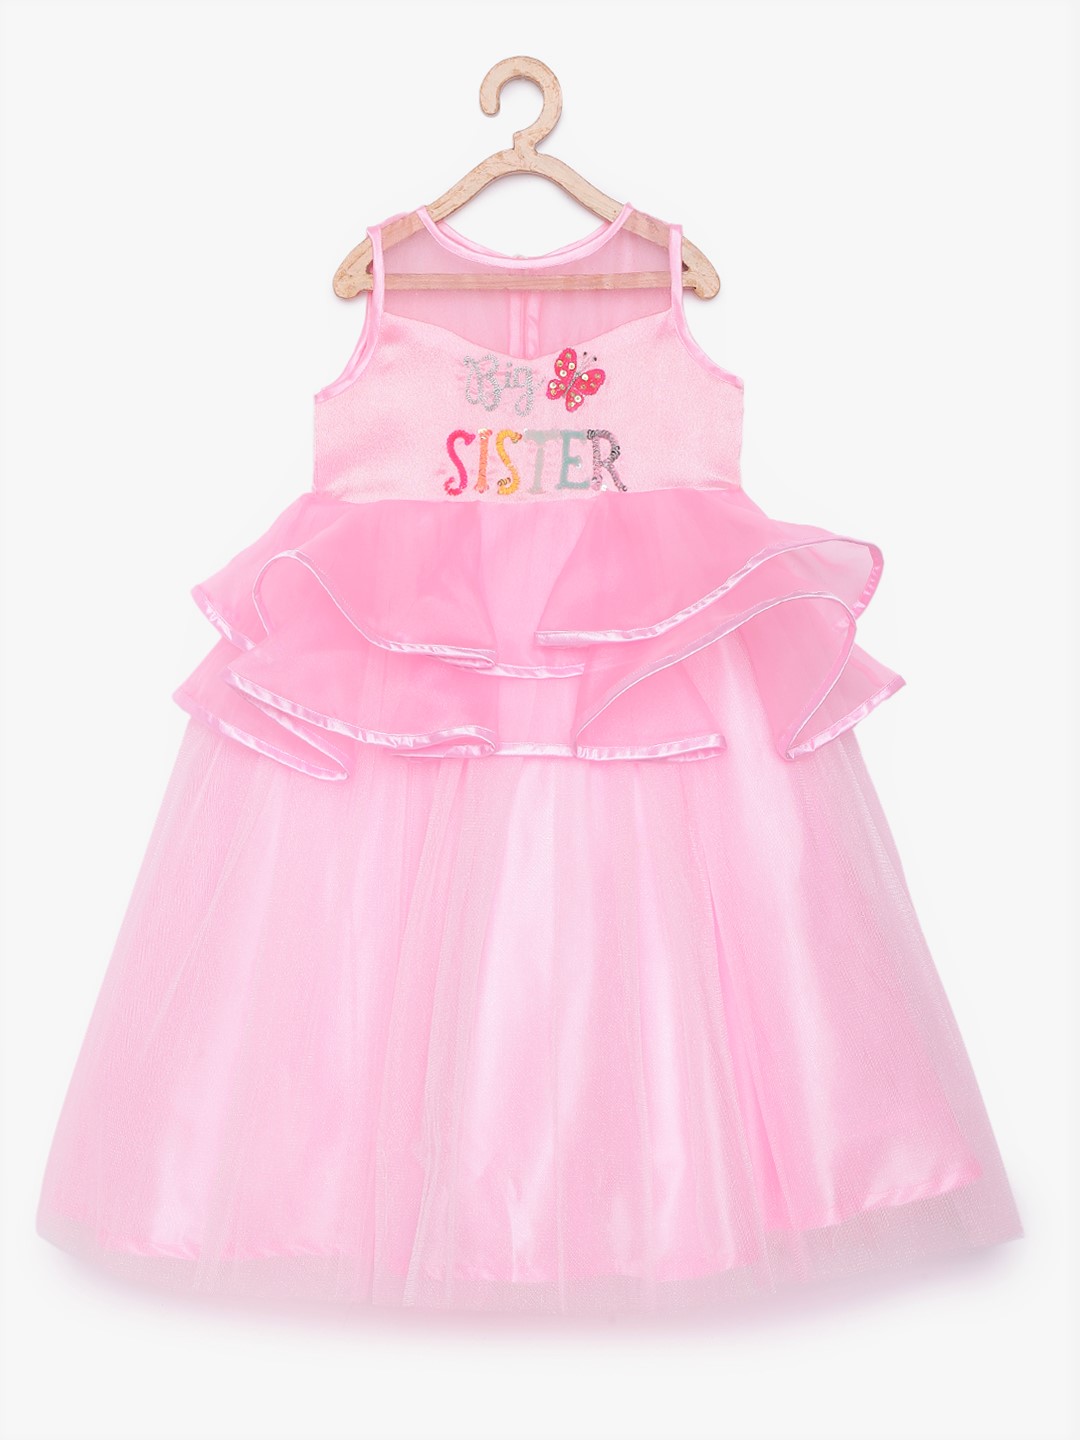 1 15 Big Sister Pink Ruffle Gown